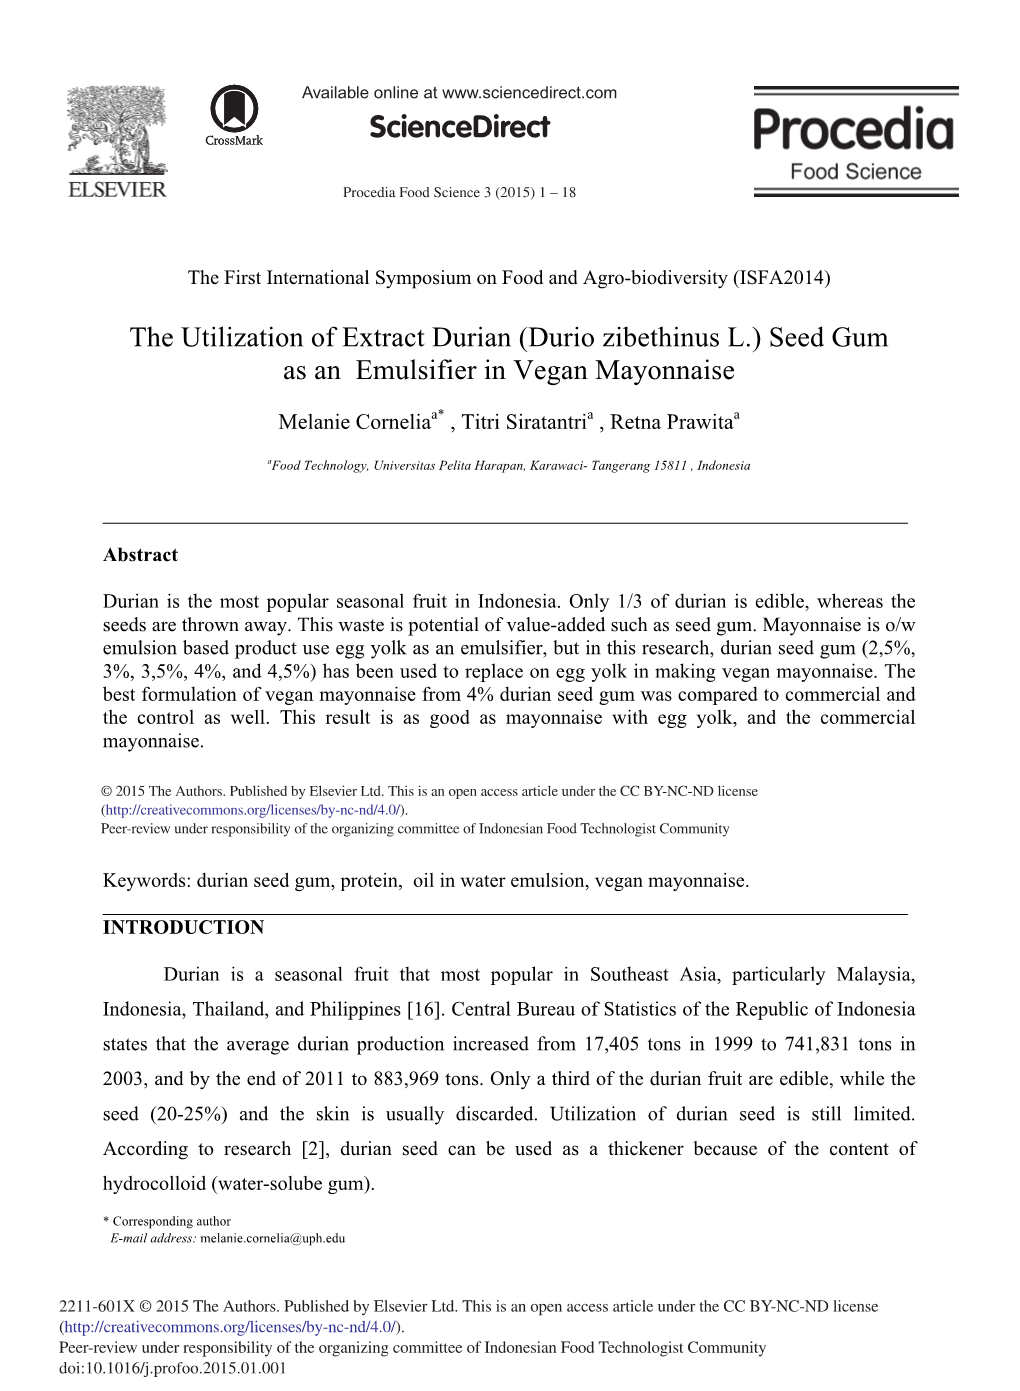 The Utilization of Extract Durian (Durio Zibethinus L.) Seed Gum As an Emulsifier in Vegan Mayonnaise